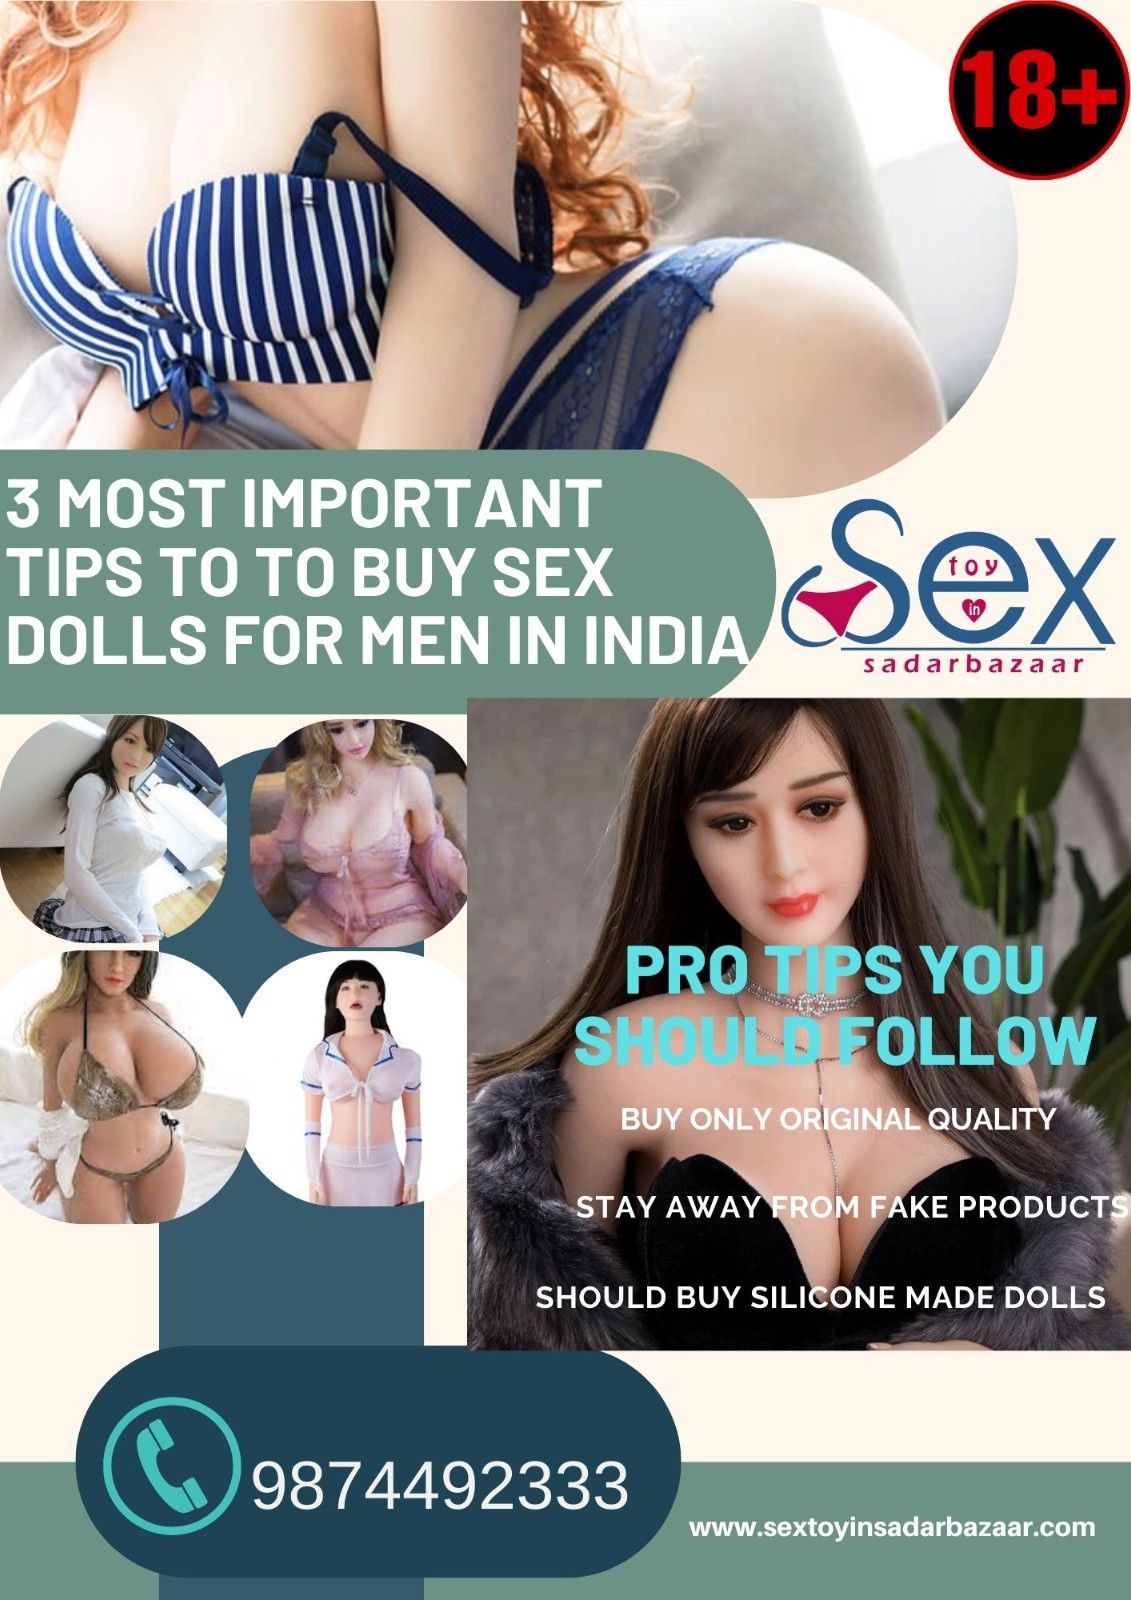 Buy Sex Doll For Men Online In India | Call/WA 9874492333